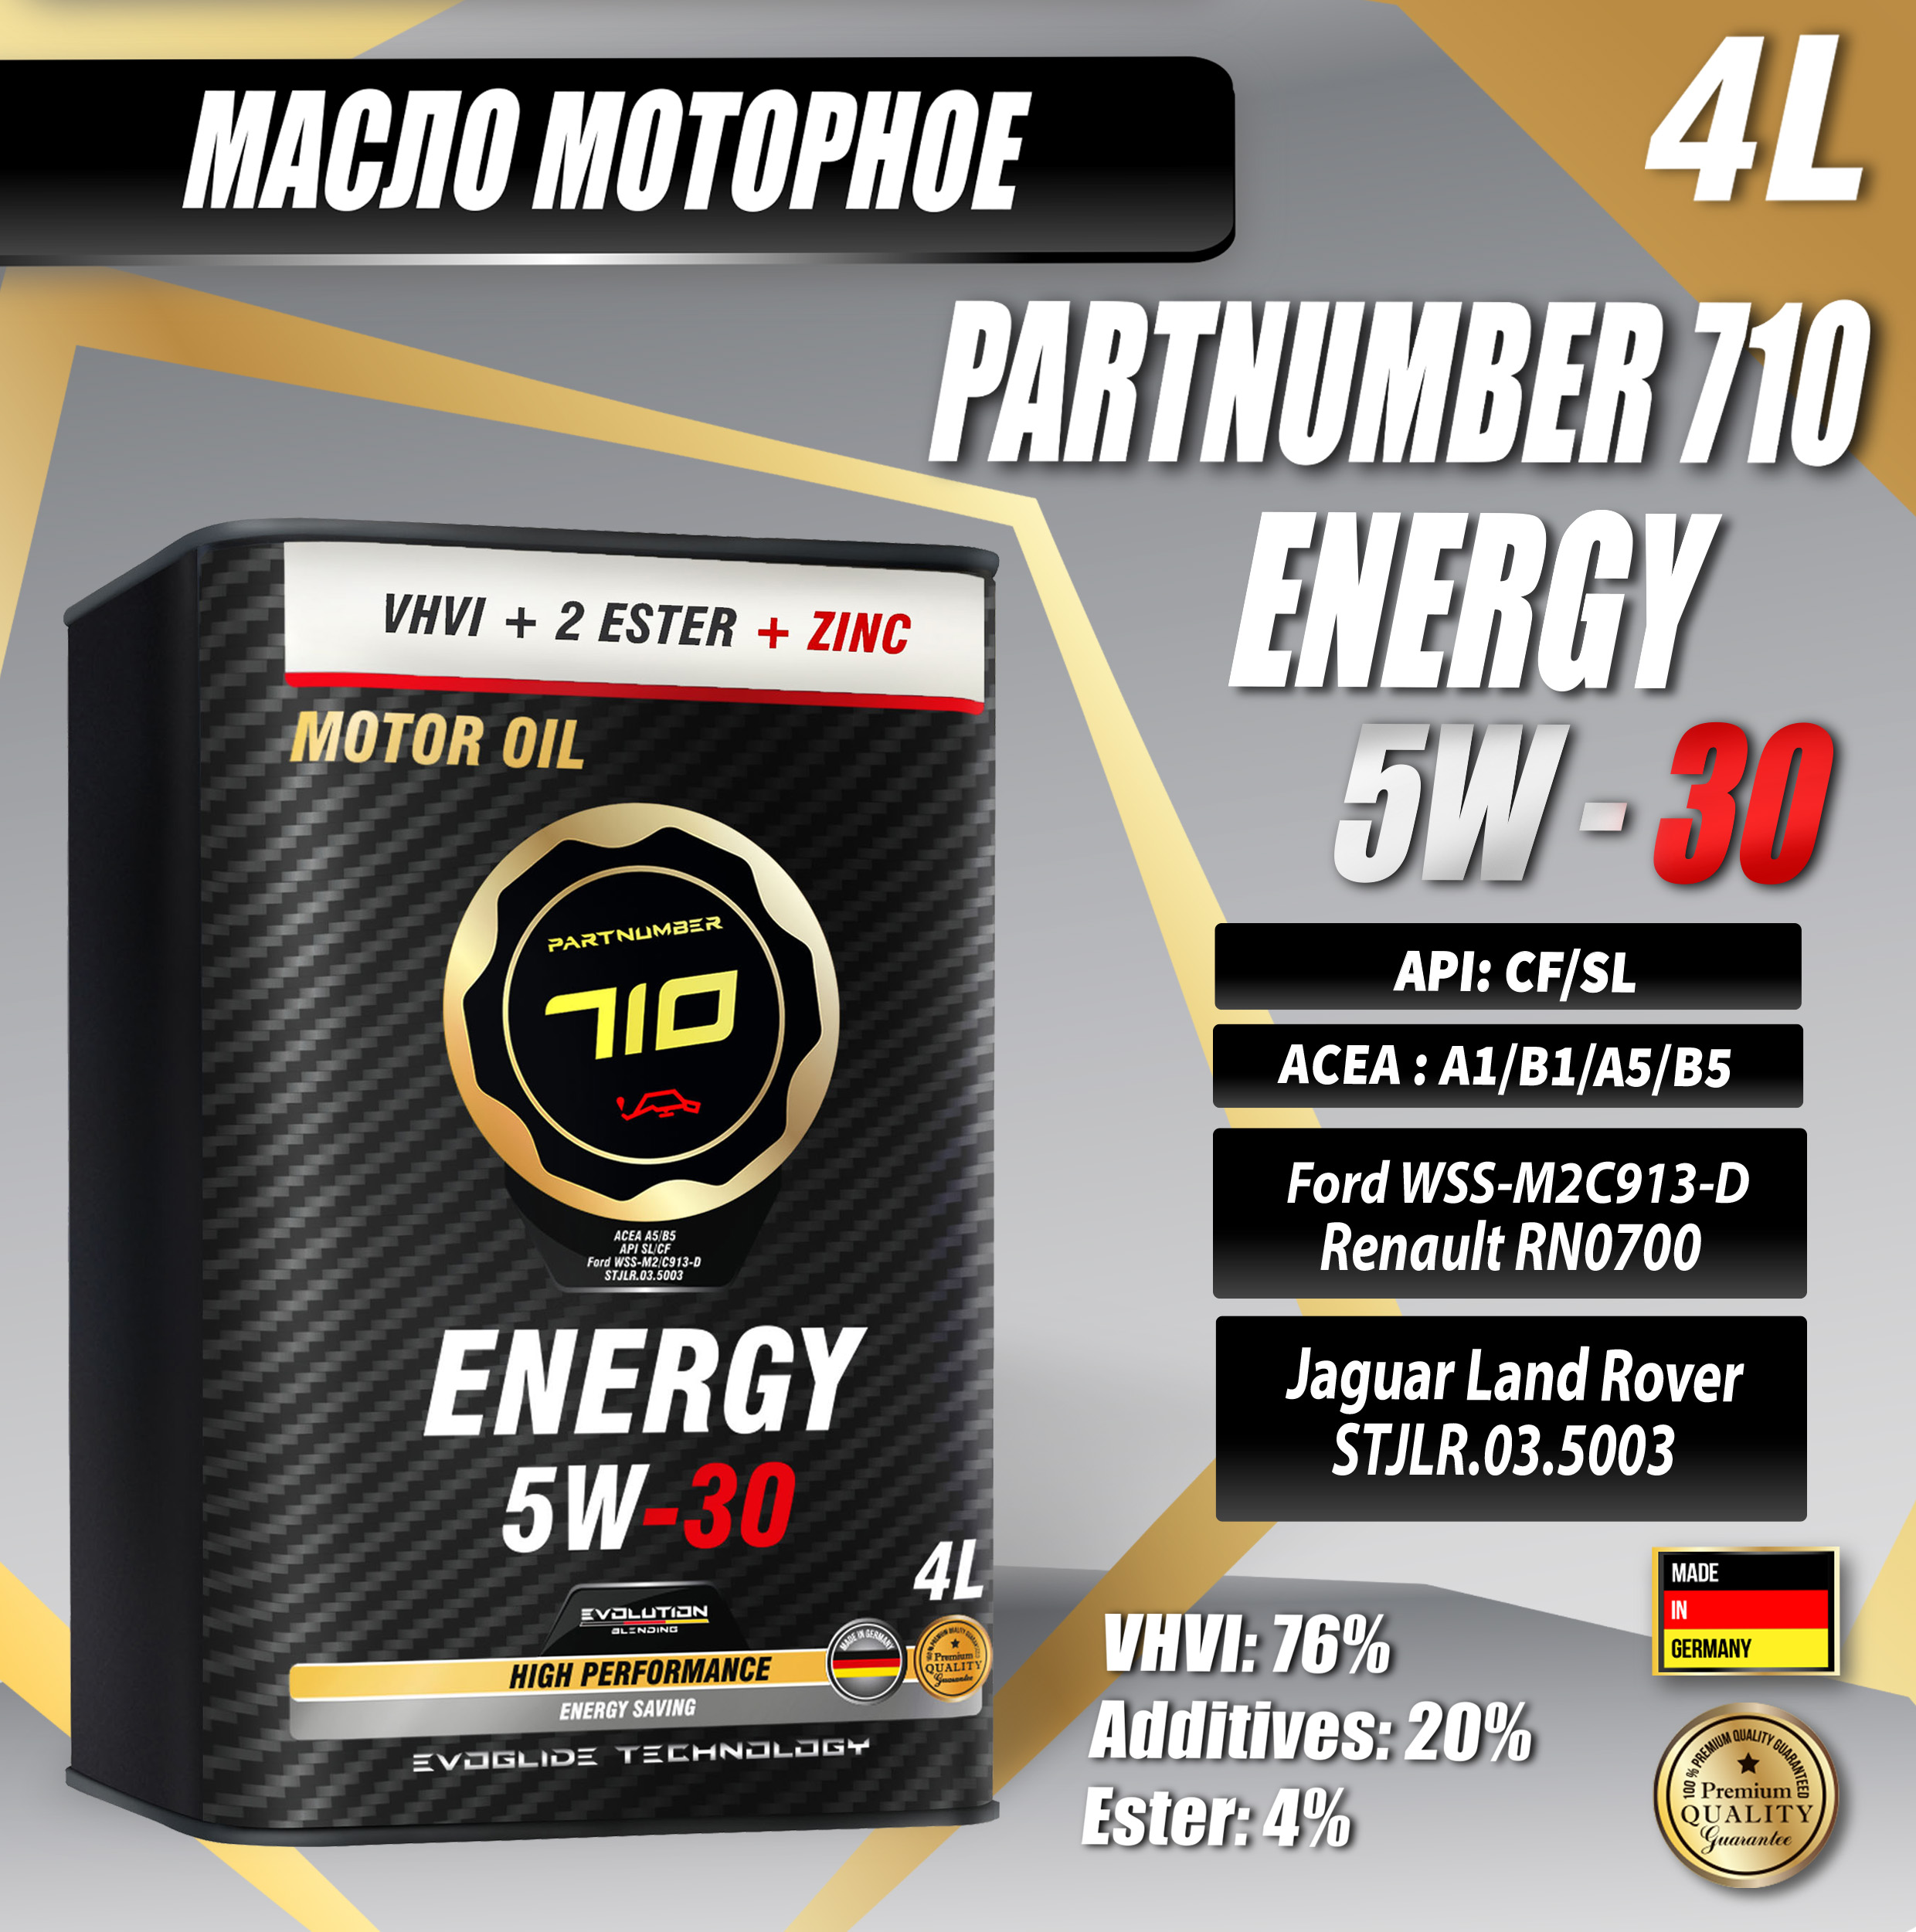 Масло 710 сайт. PARTNUMBER 710 Energy 5w-30 4л. Масло 710 PARTNUMBER. PARTNUMBER 710 Europe 5w-30. Oil Part number 710.